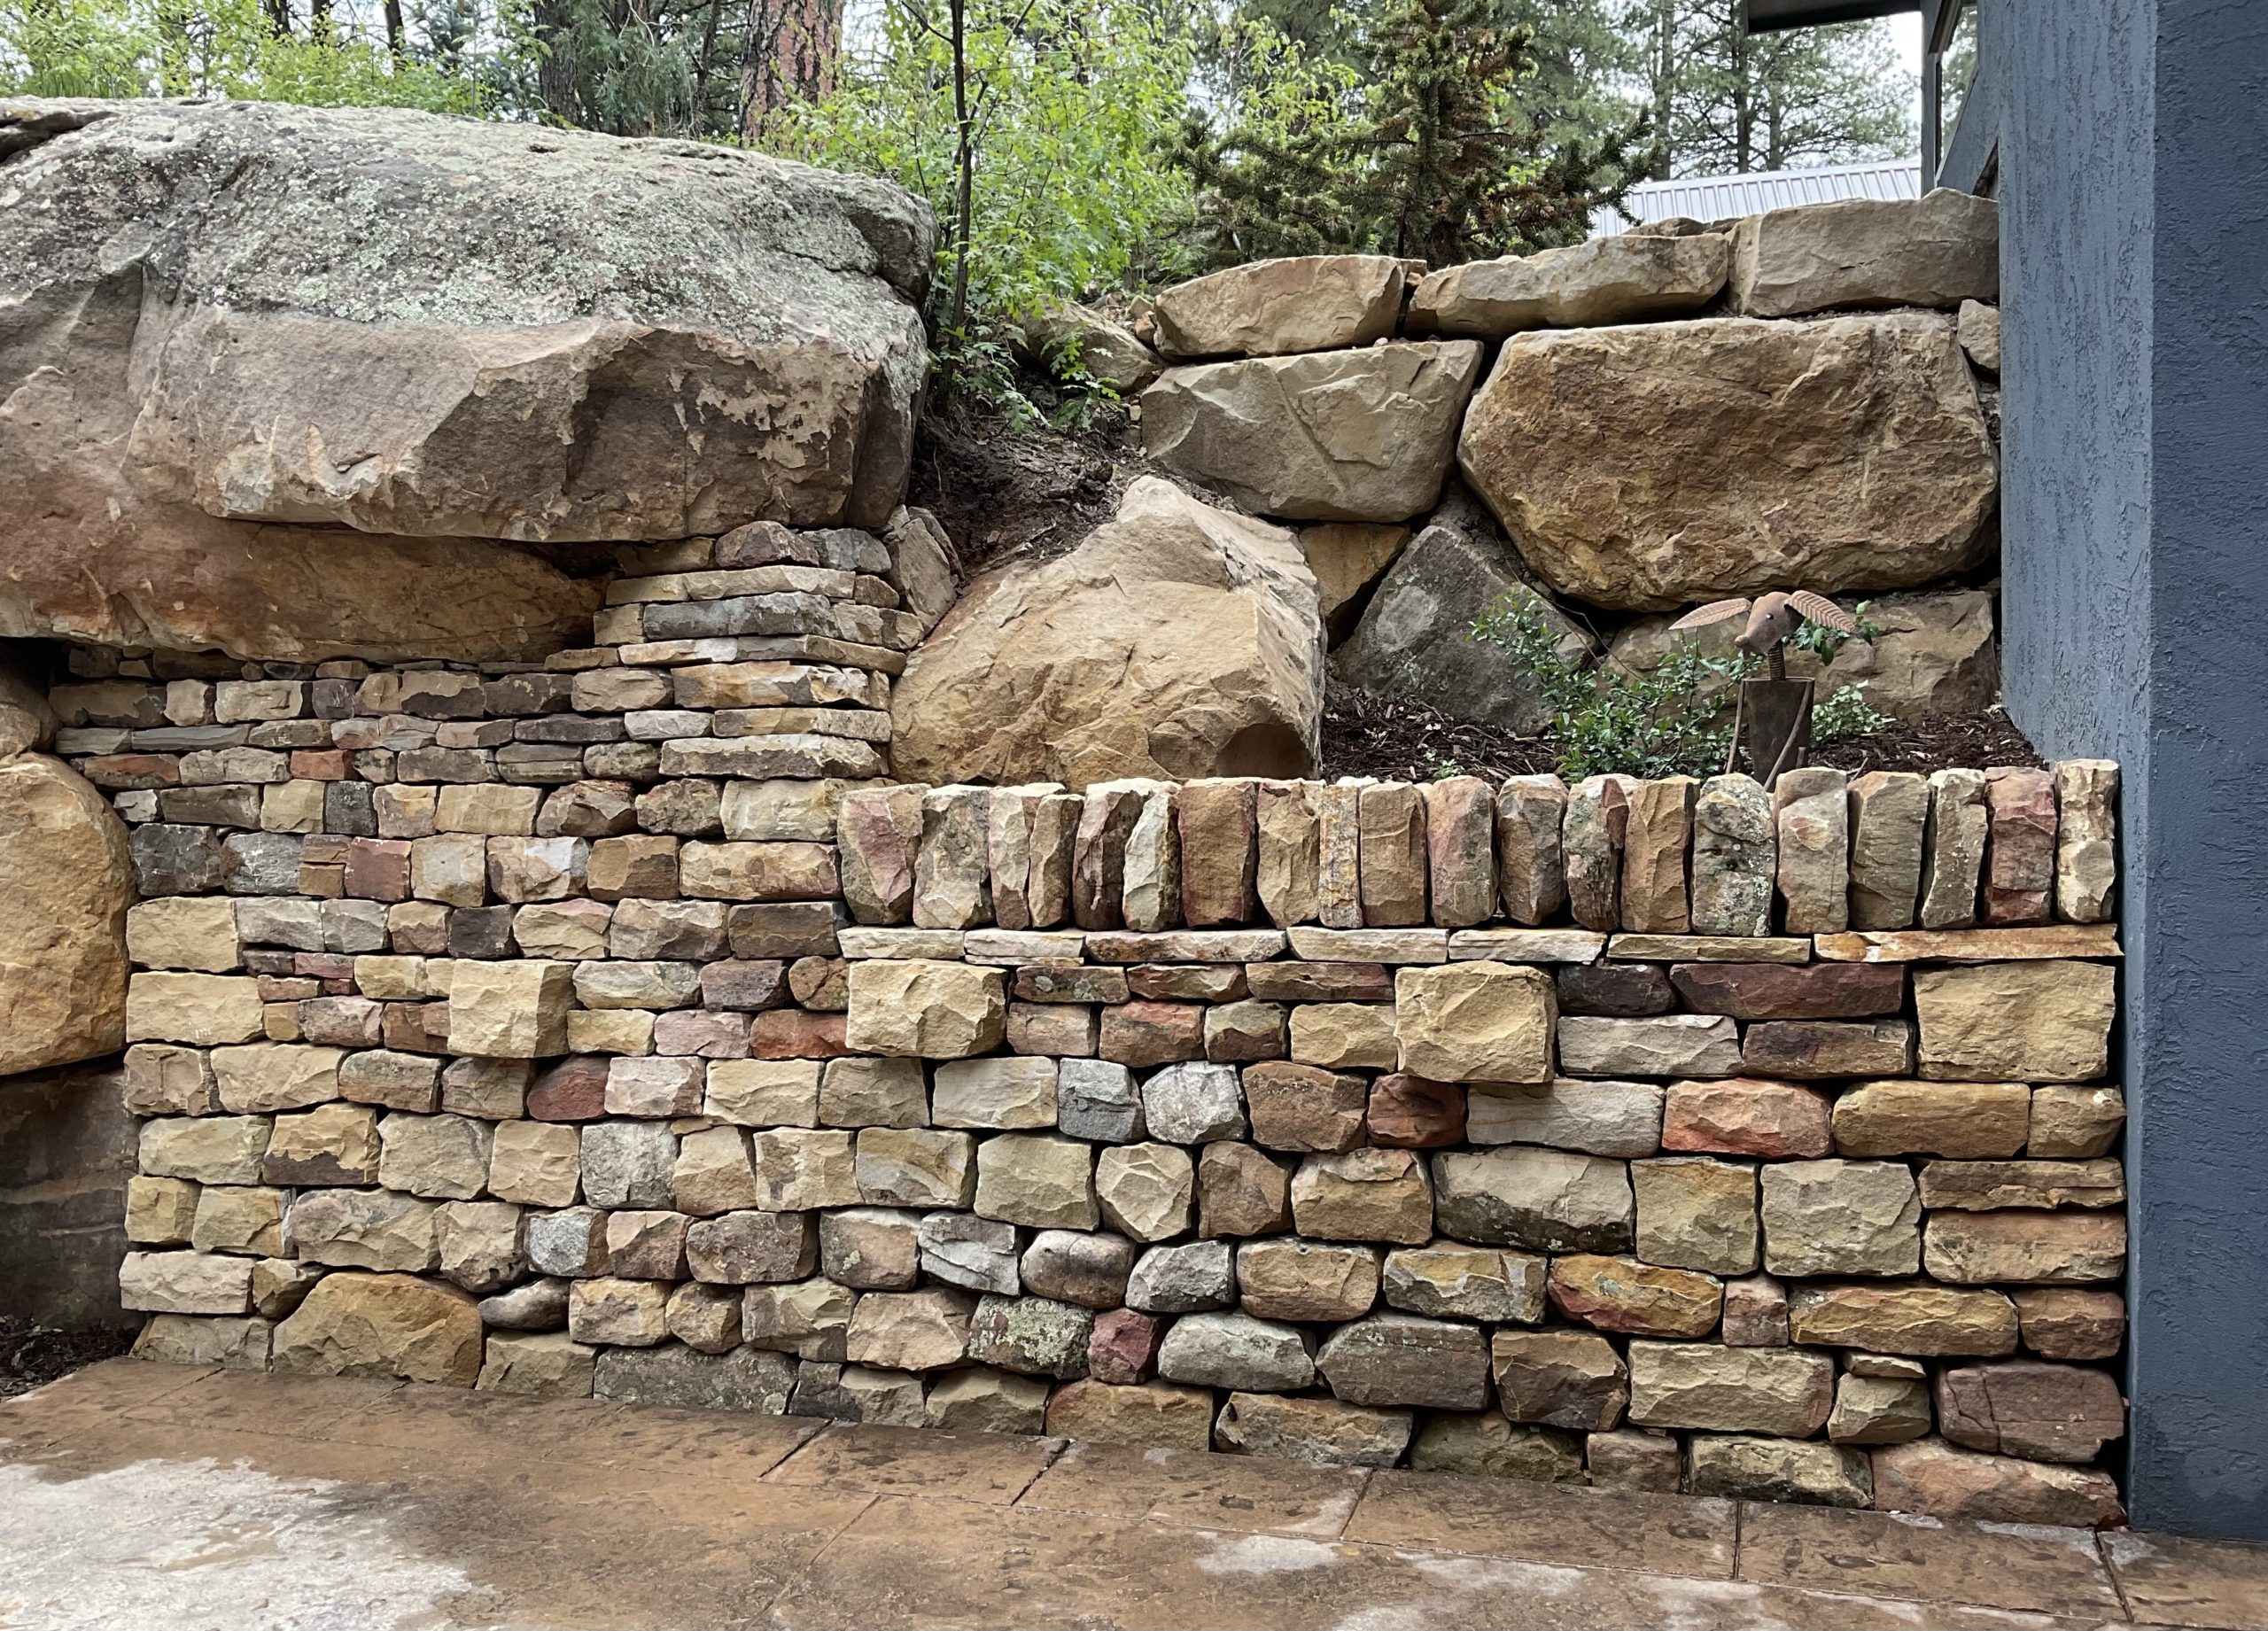 traditional dry stone retaining wall with through stones and vertical coping stones. boulder retaining wall also visible